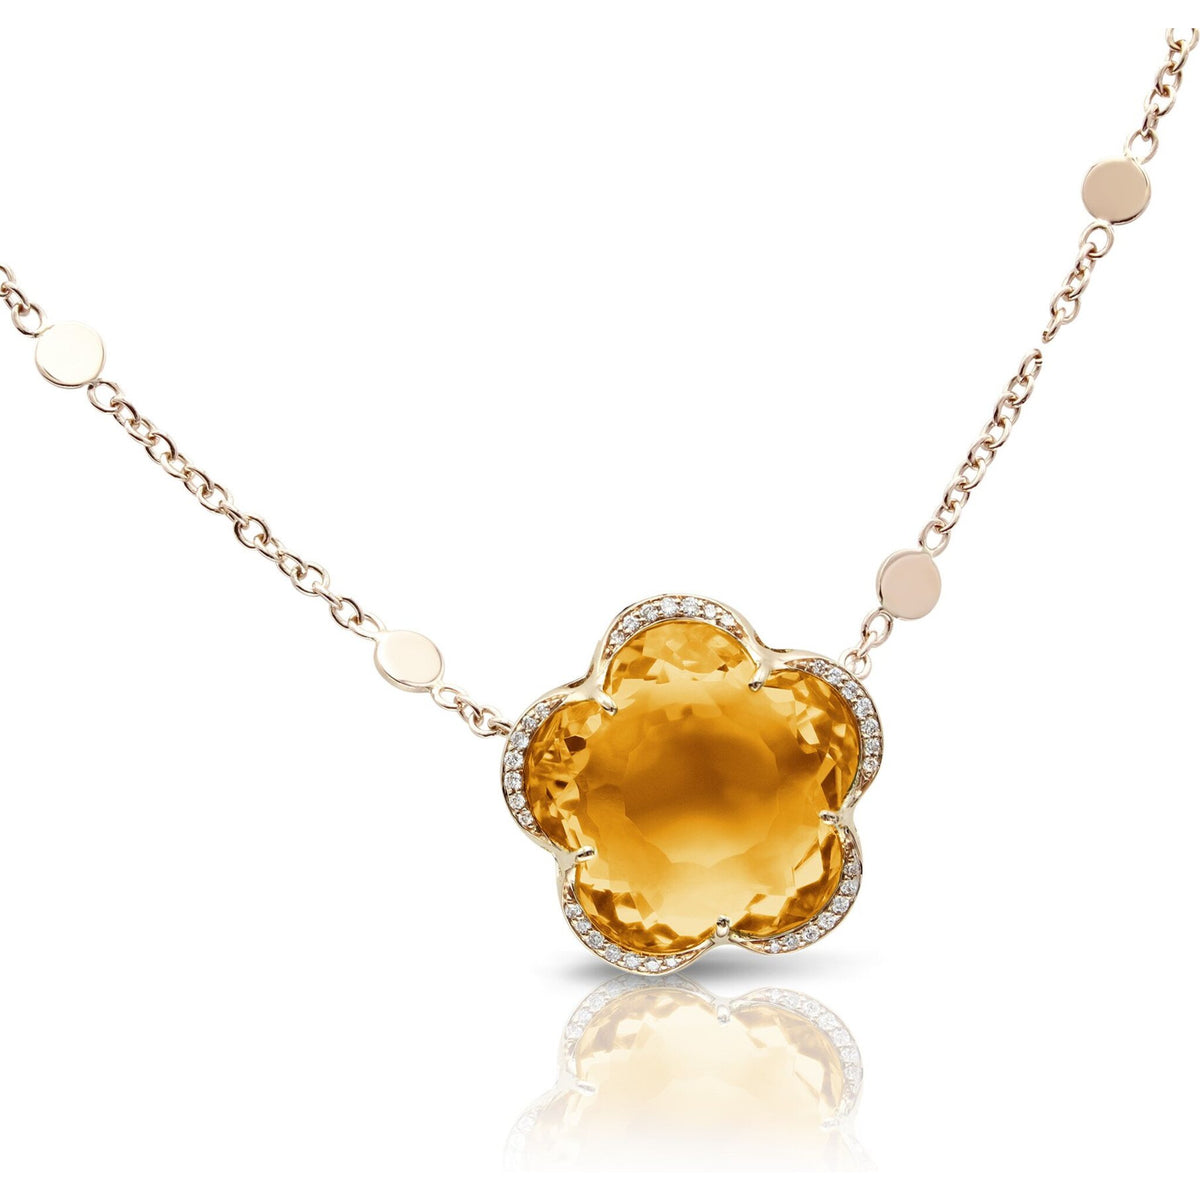 Pasquale Bruni - Bon Ton Divine Necklace in 18k Rose Gold with Citrine and Diamonds